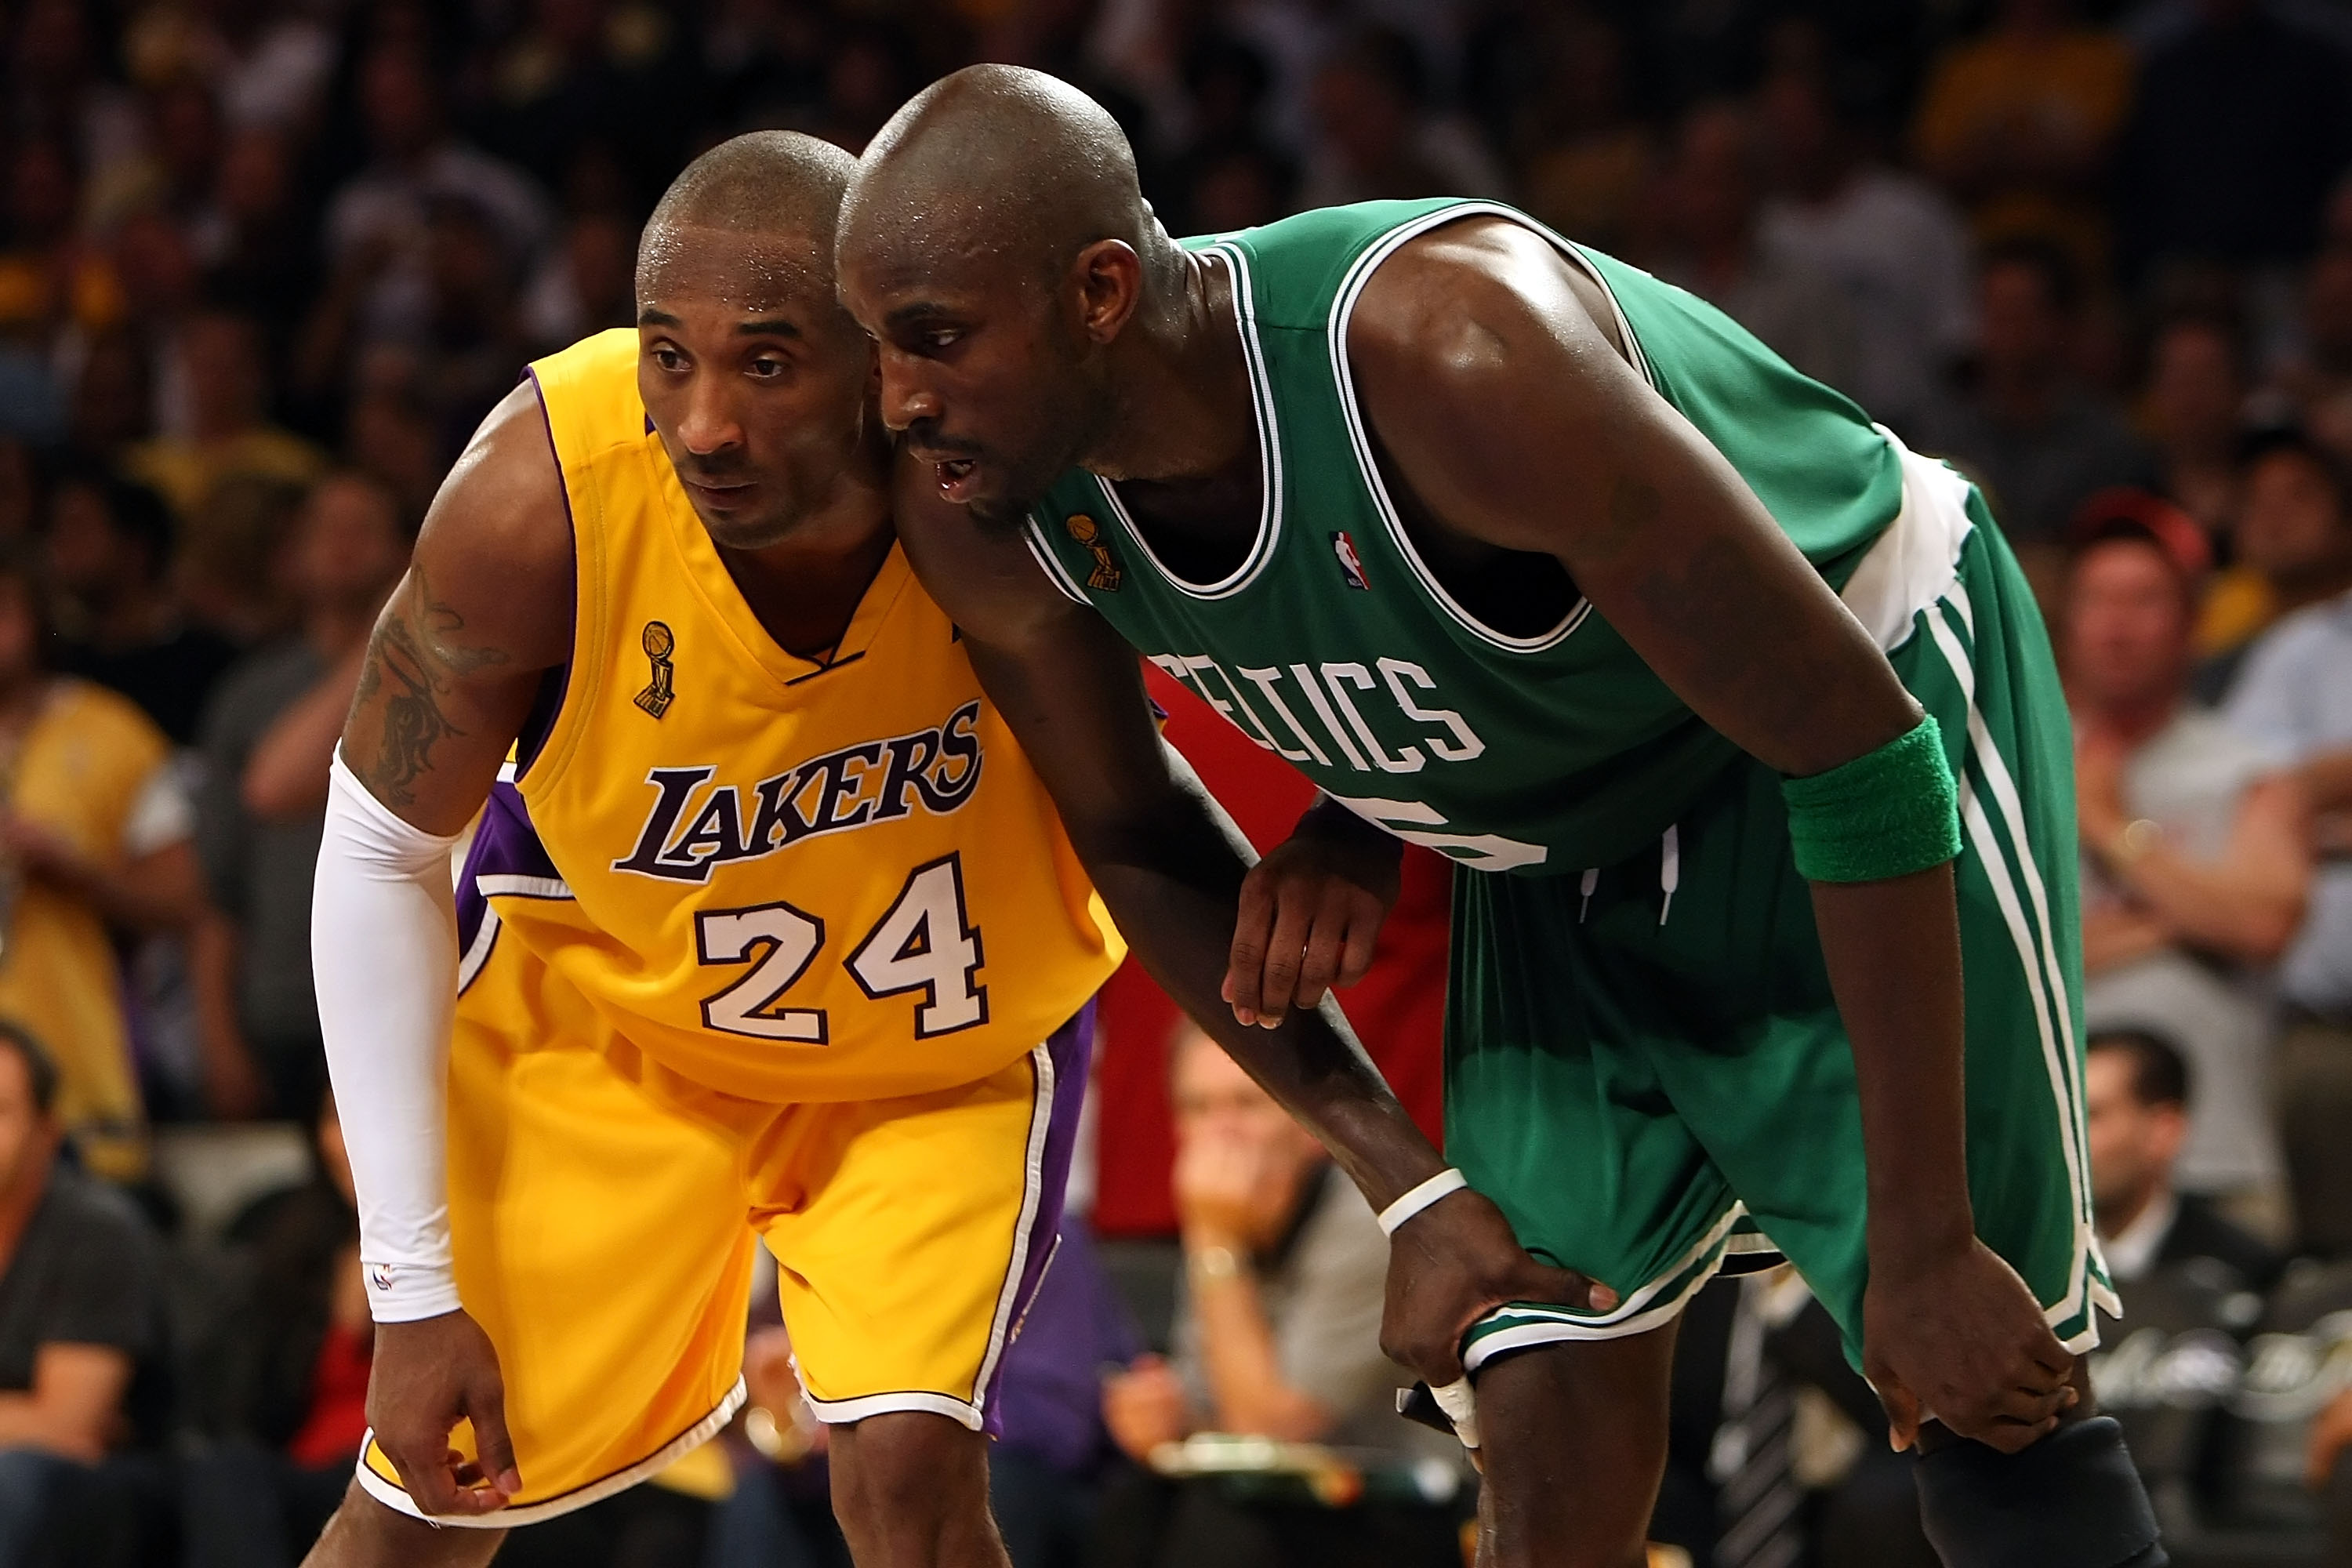 Kevin Garnett wanted to team up with Kobe Bryant on Lakers before trade to  Celtics - Silver Screen and Roll